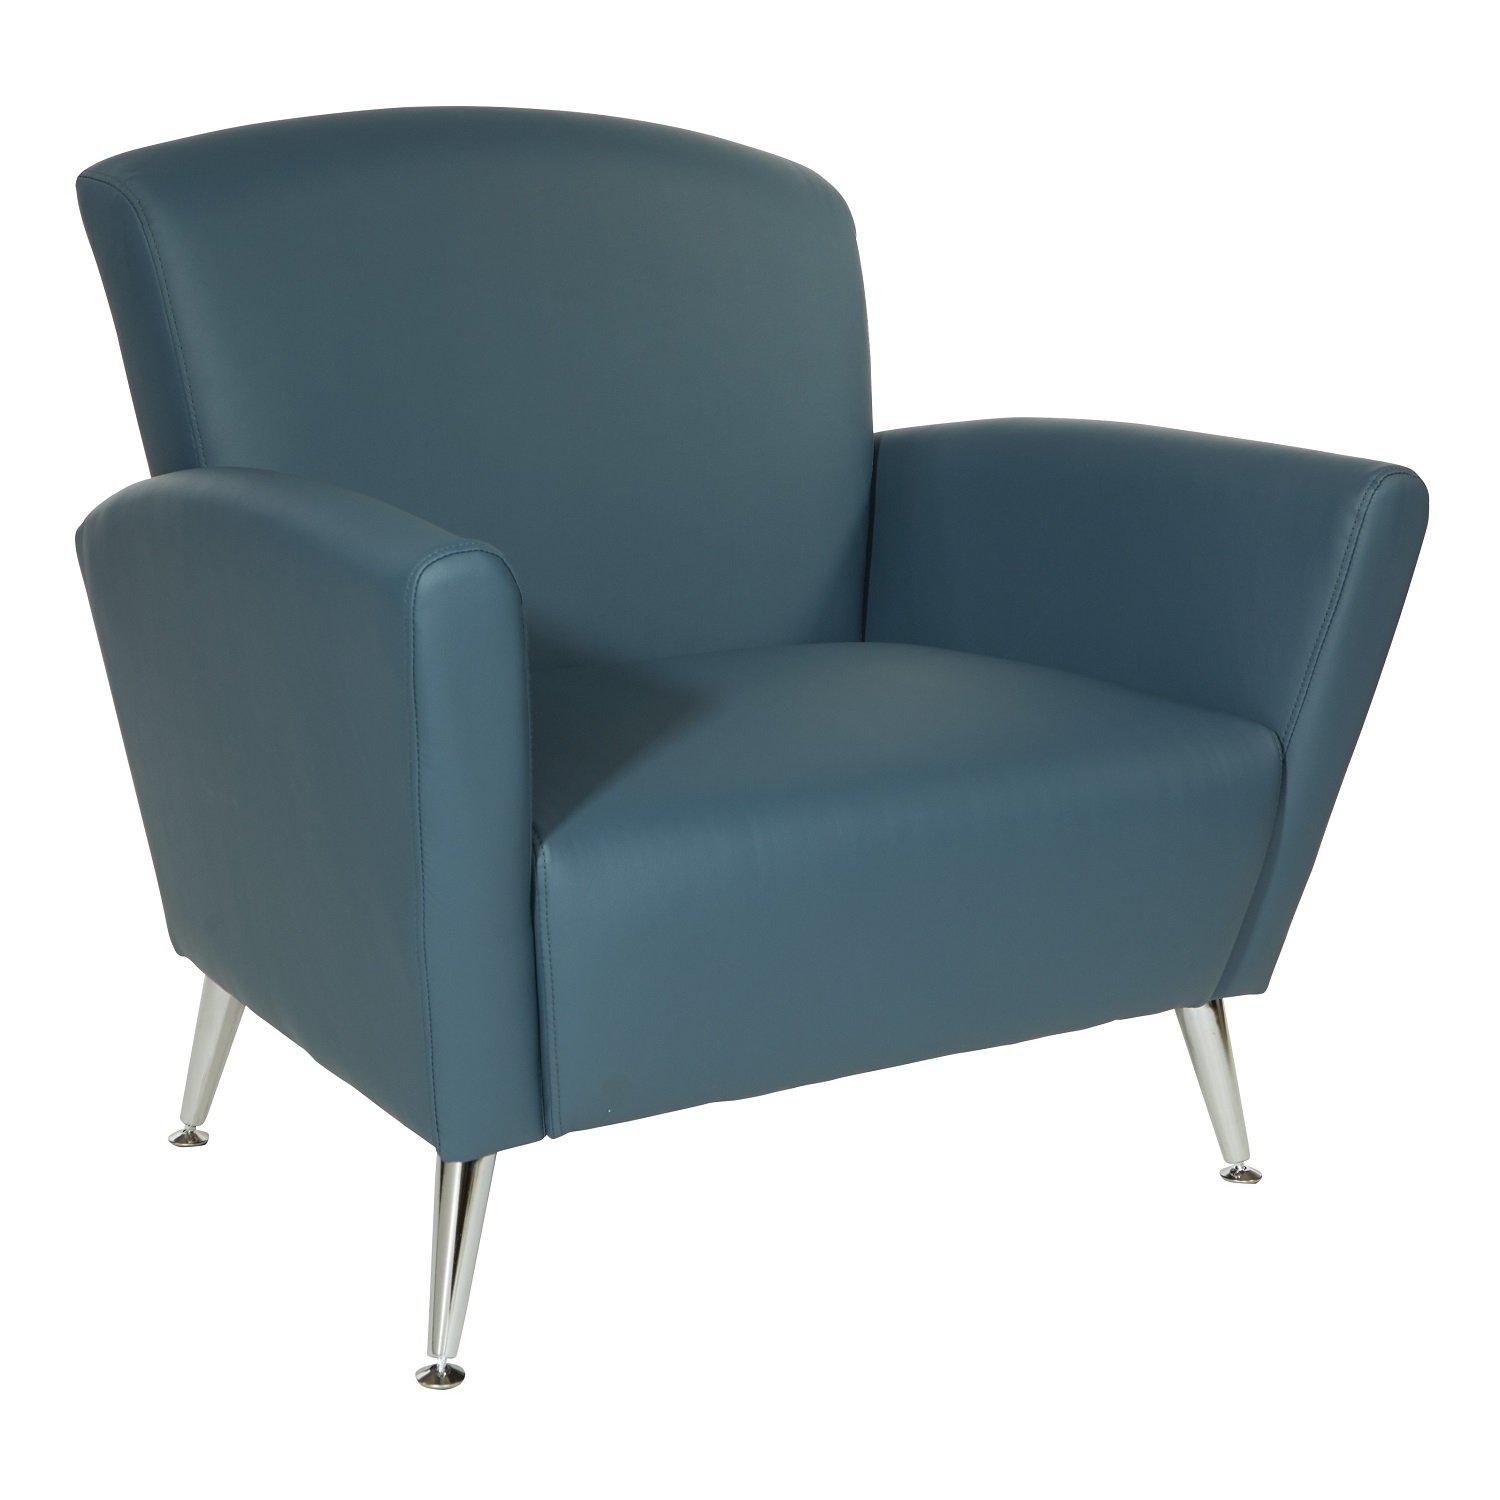 Club Chair with Antimicrobial Vinyl Upholstery, Chrome Legs